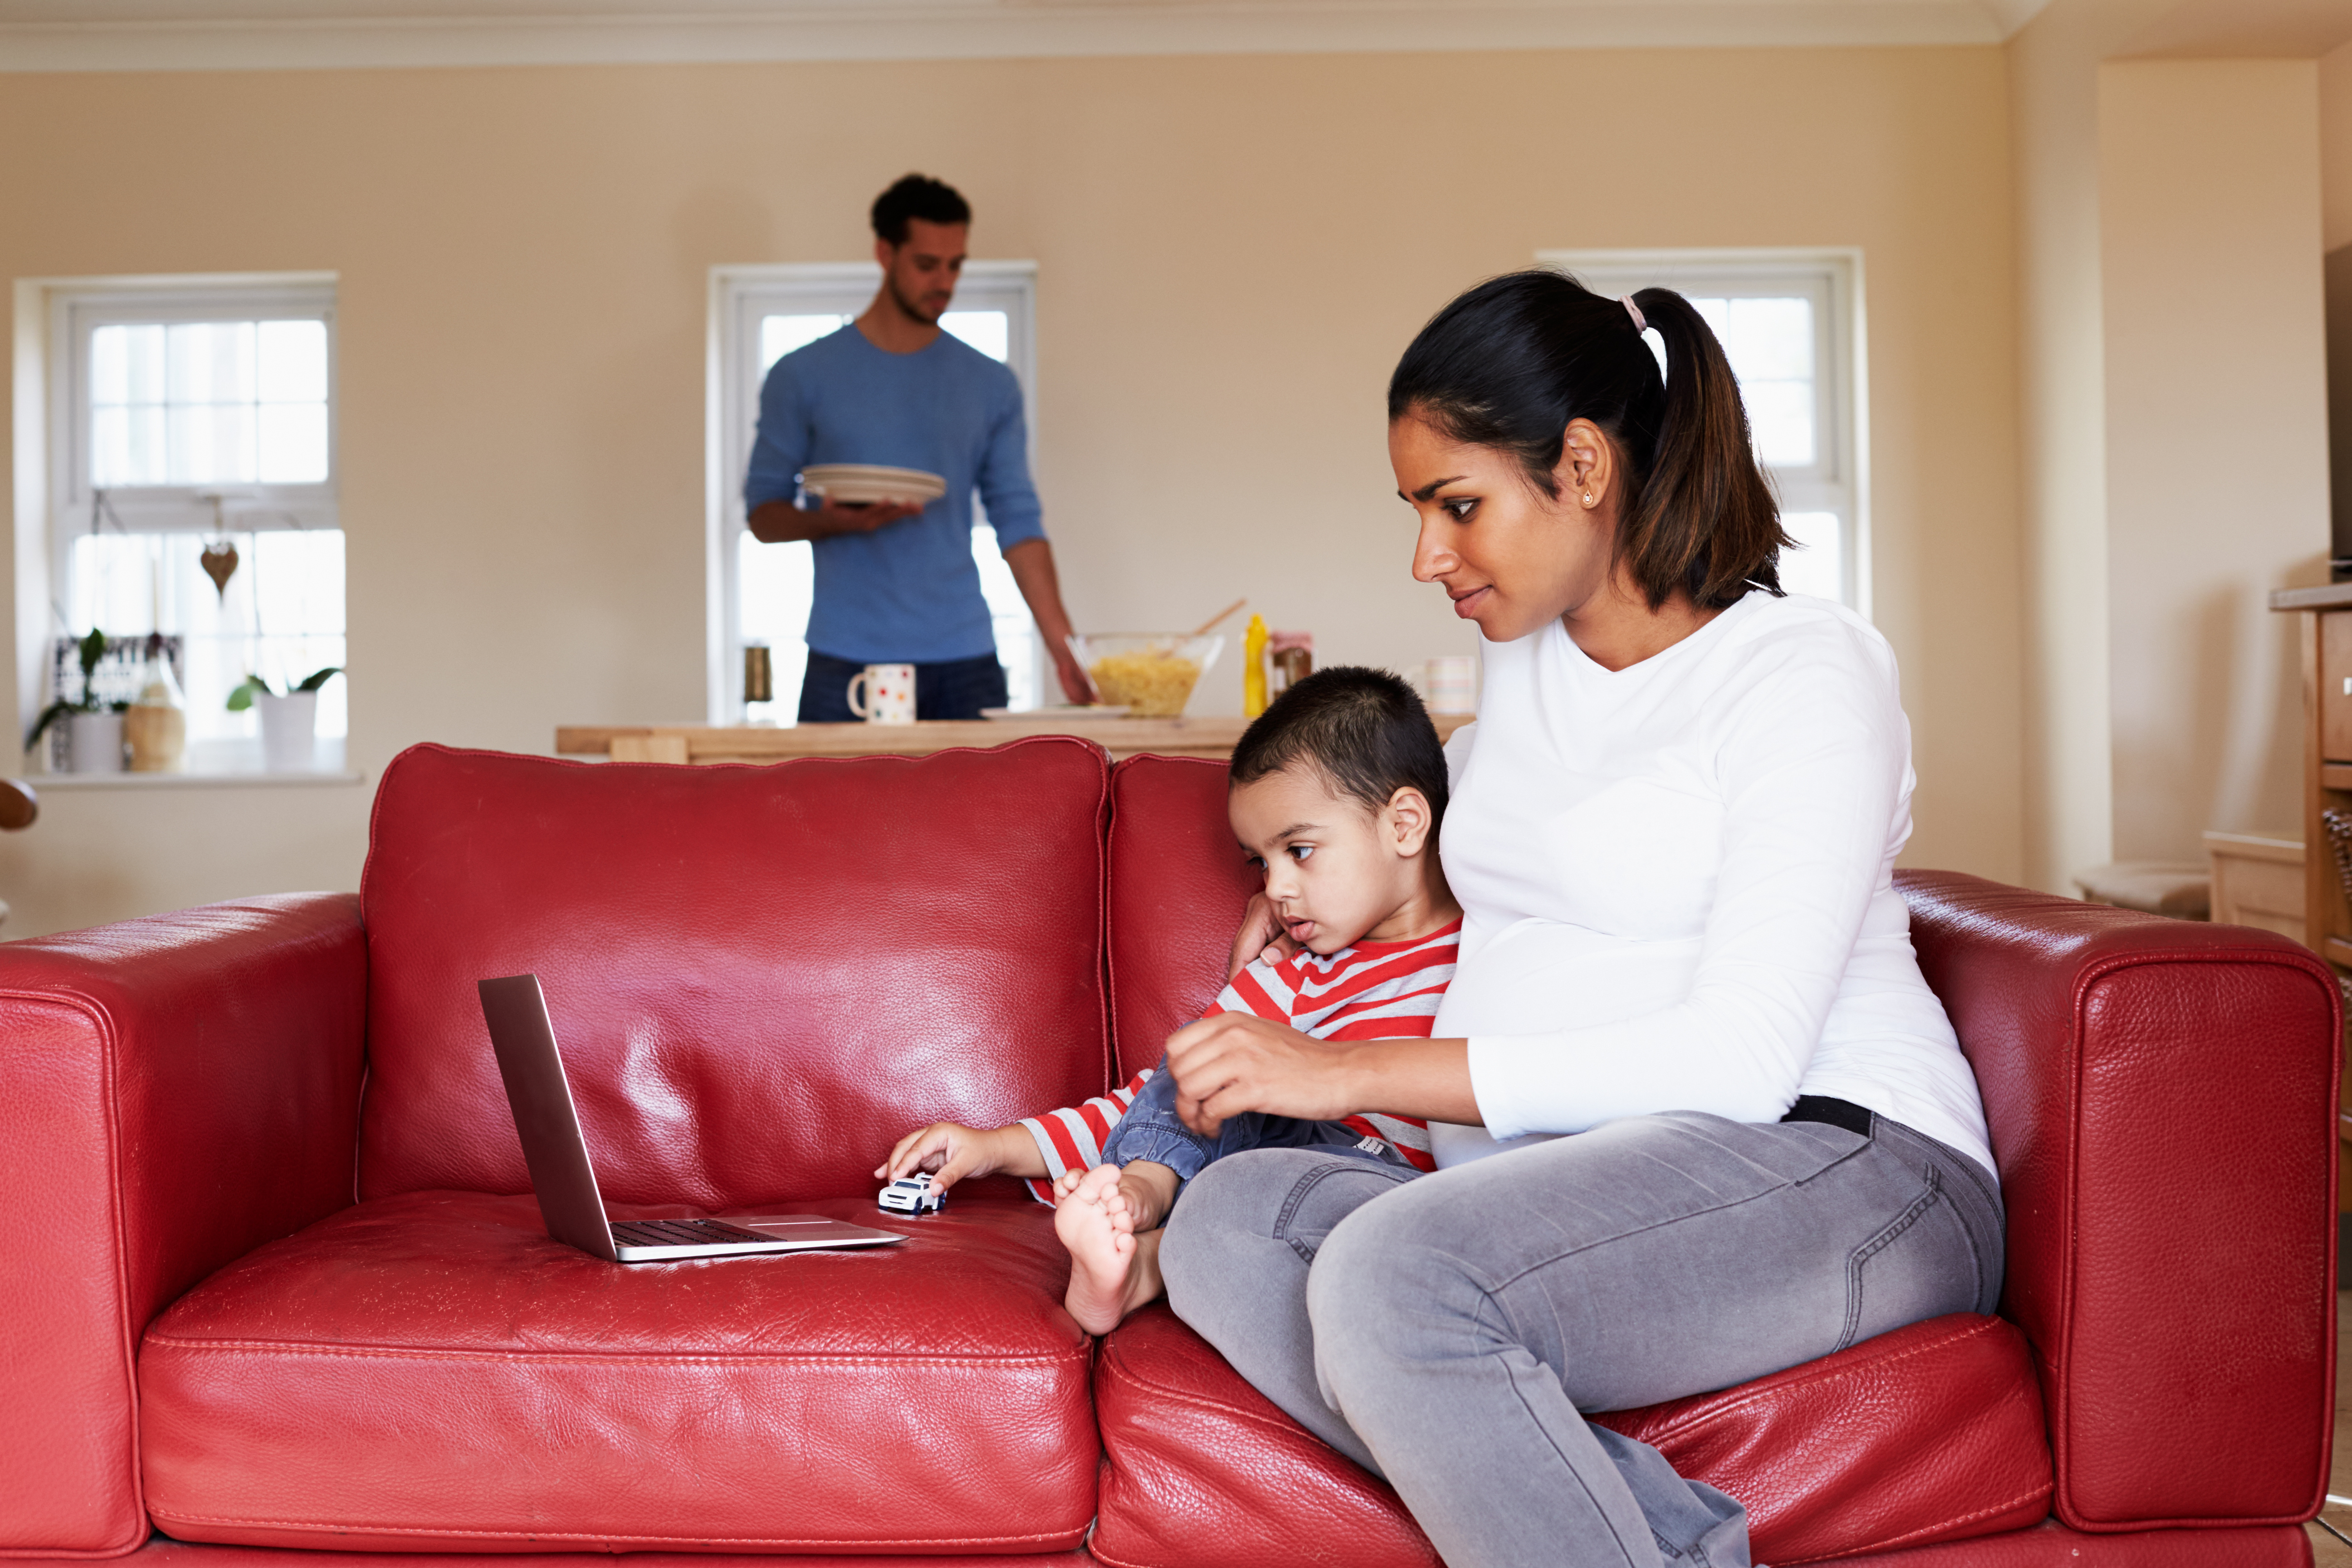 Pregnant Mother Looks At Laptop On Sofa With Son